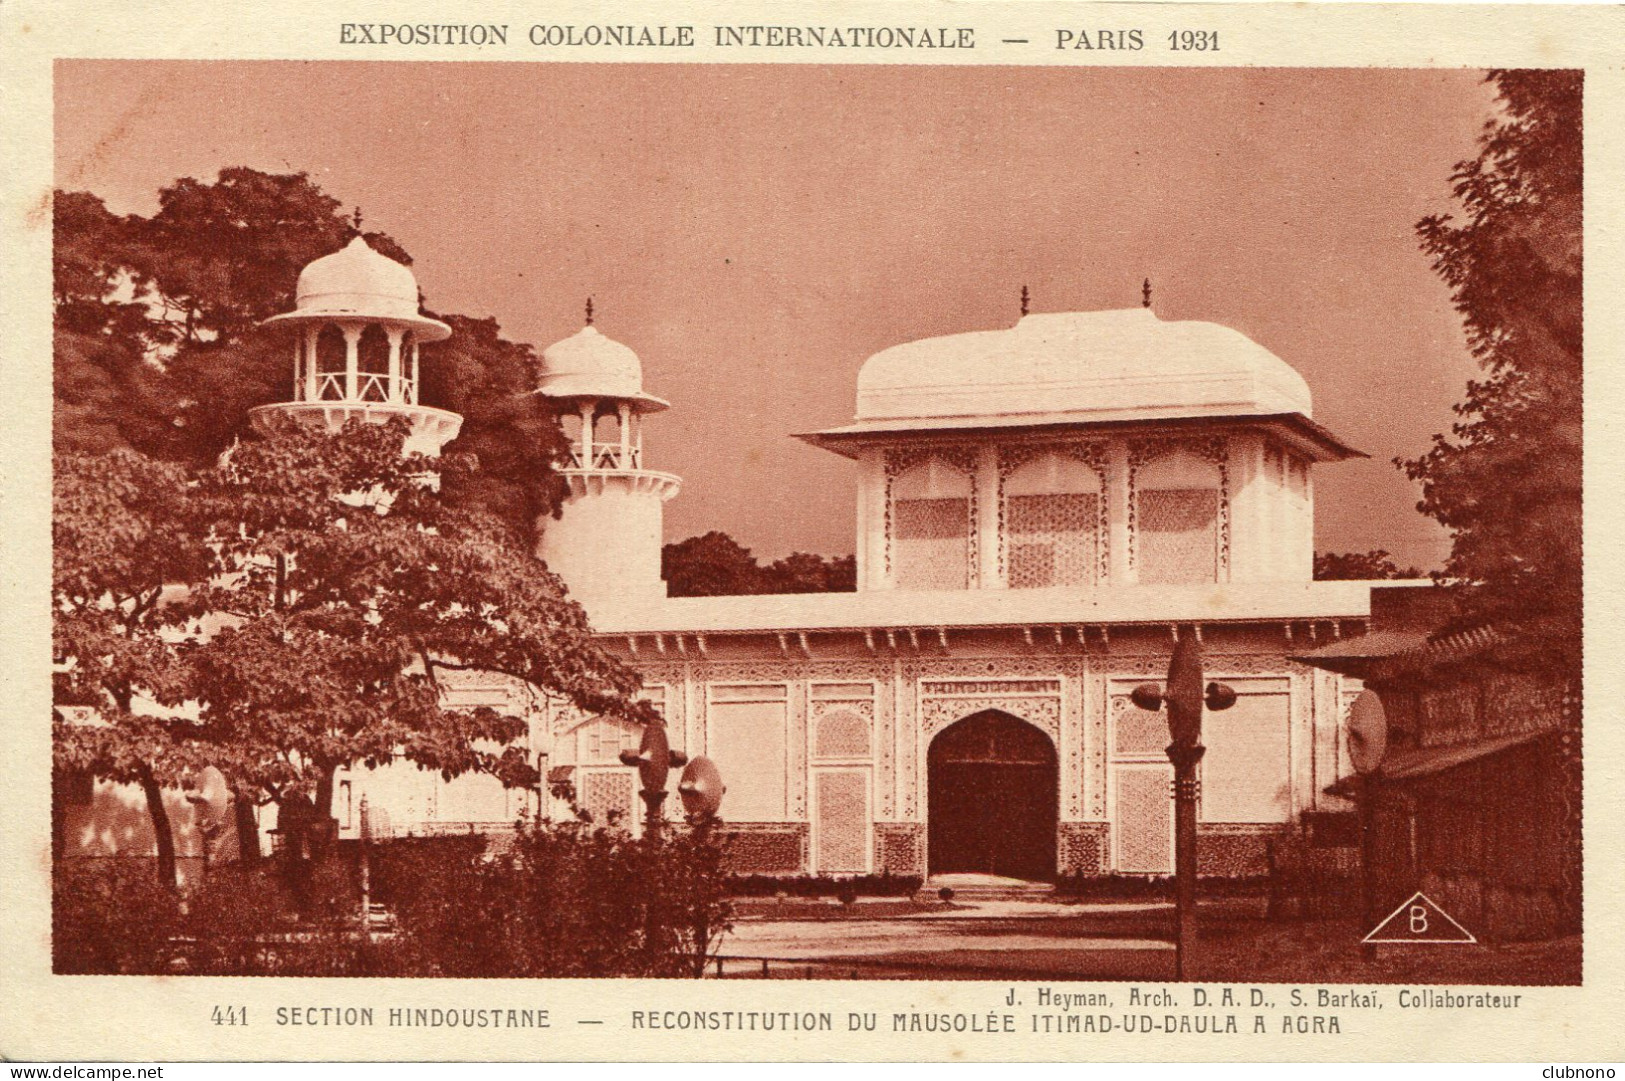 CPA -  PARIS - EXPO COLONIALE  INT. 1931 -  SECTION INDOUSTANE - RECONSTITUTION DU MAUSOLEE ITIMAD-UD-DAULA A AGRA - Ausstellungen